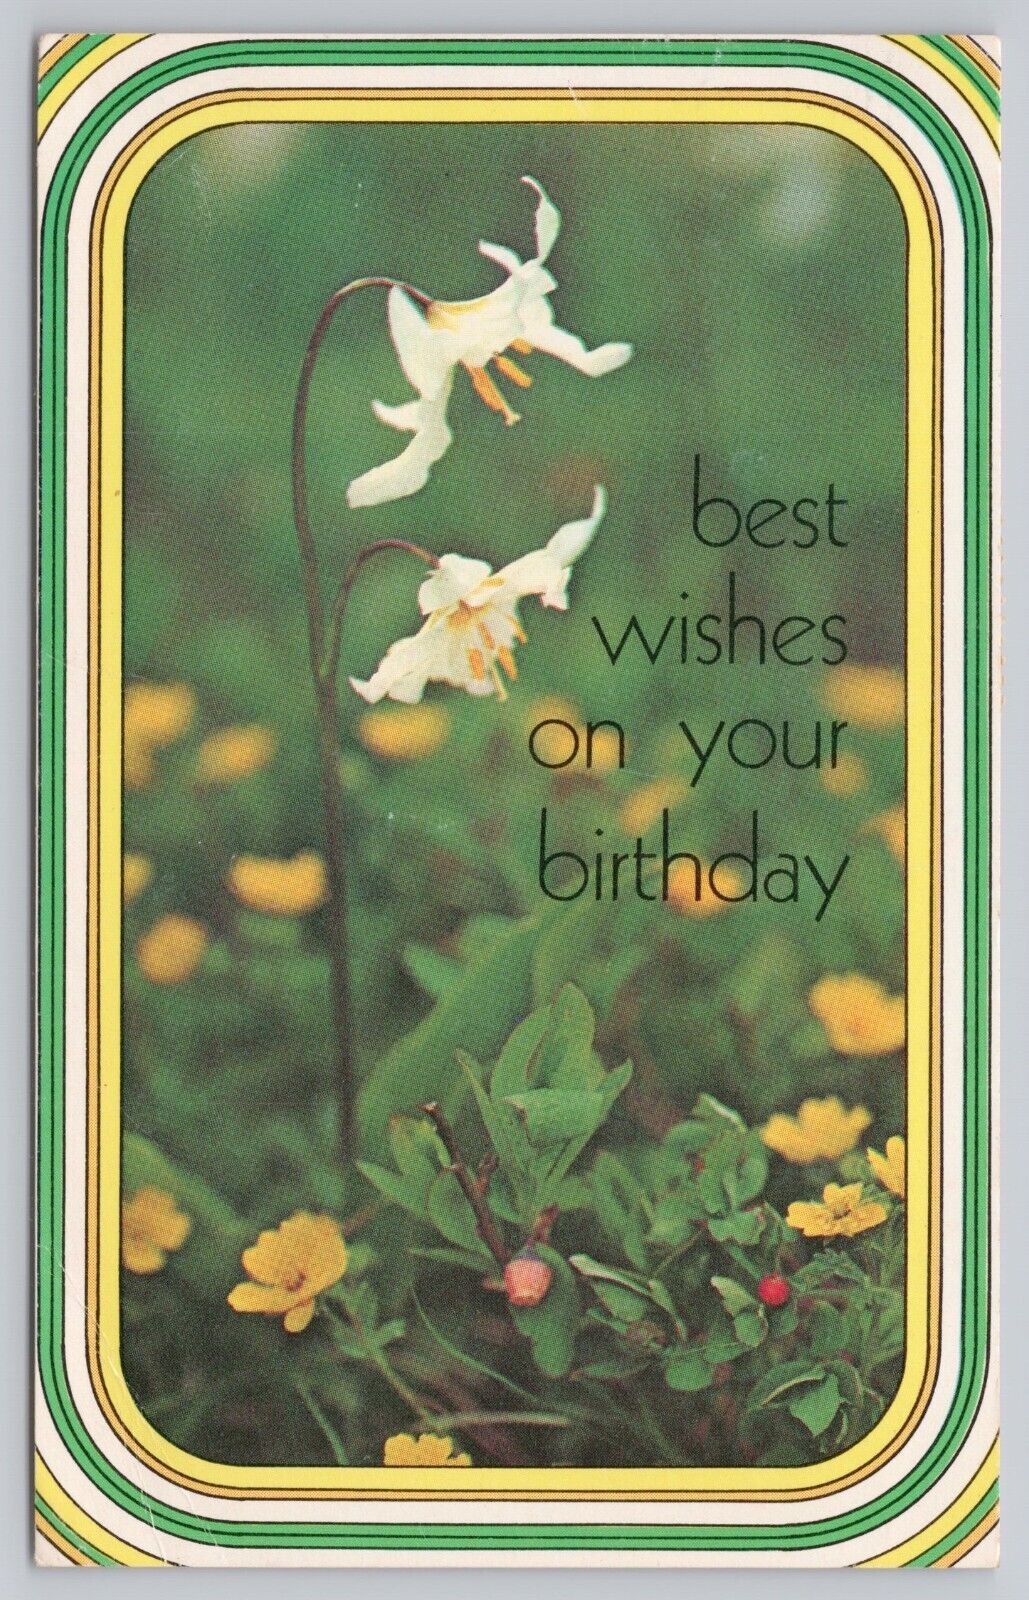 Best Wishes on Your Birthday, Pretty White & Yellow Flowers, Vintage Postcard